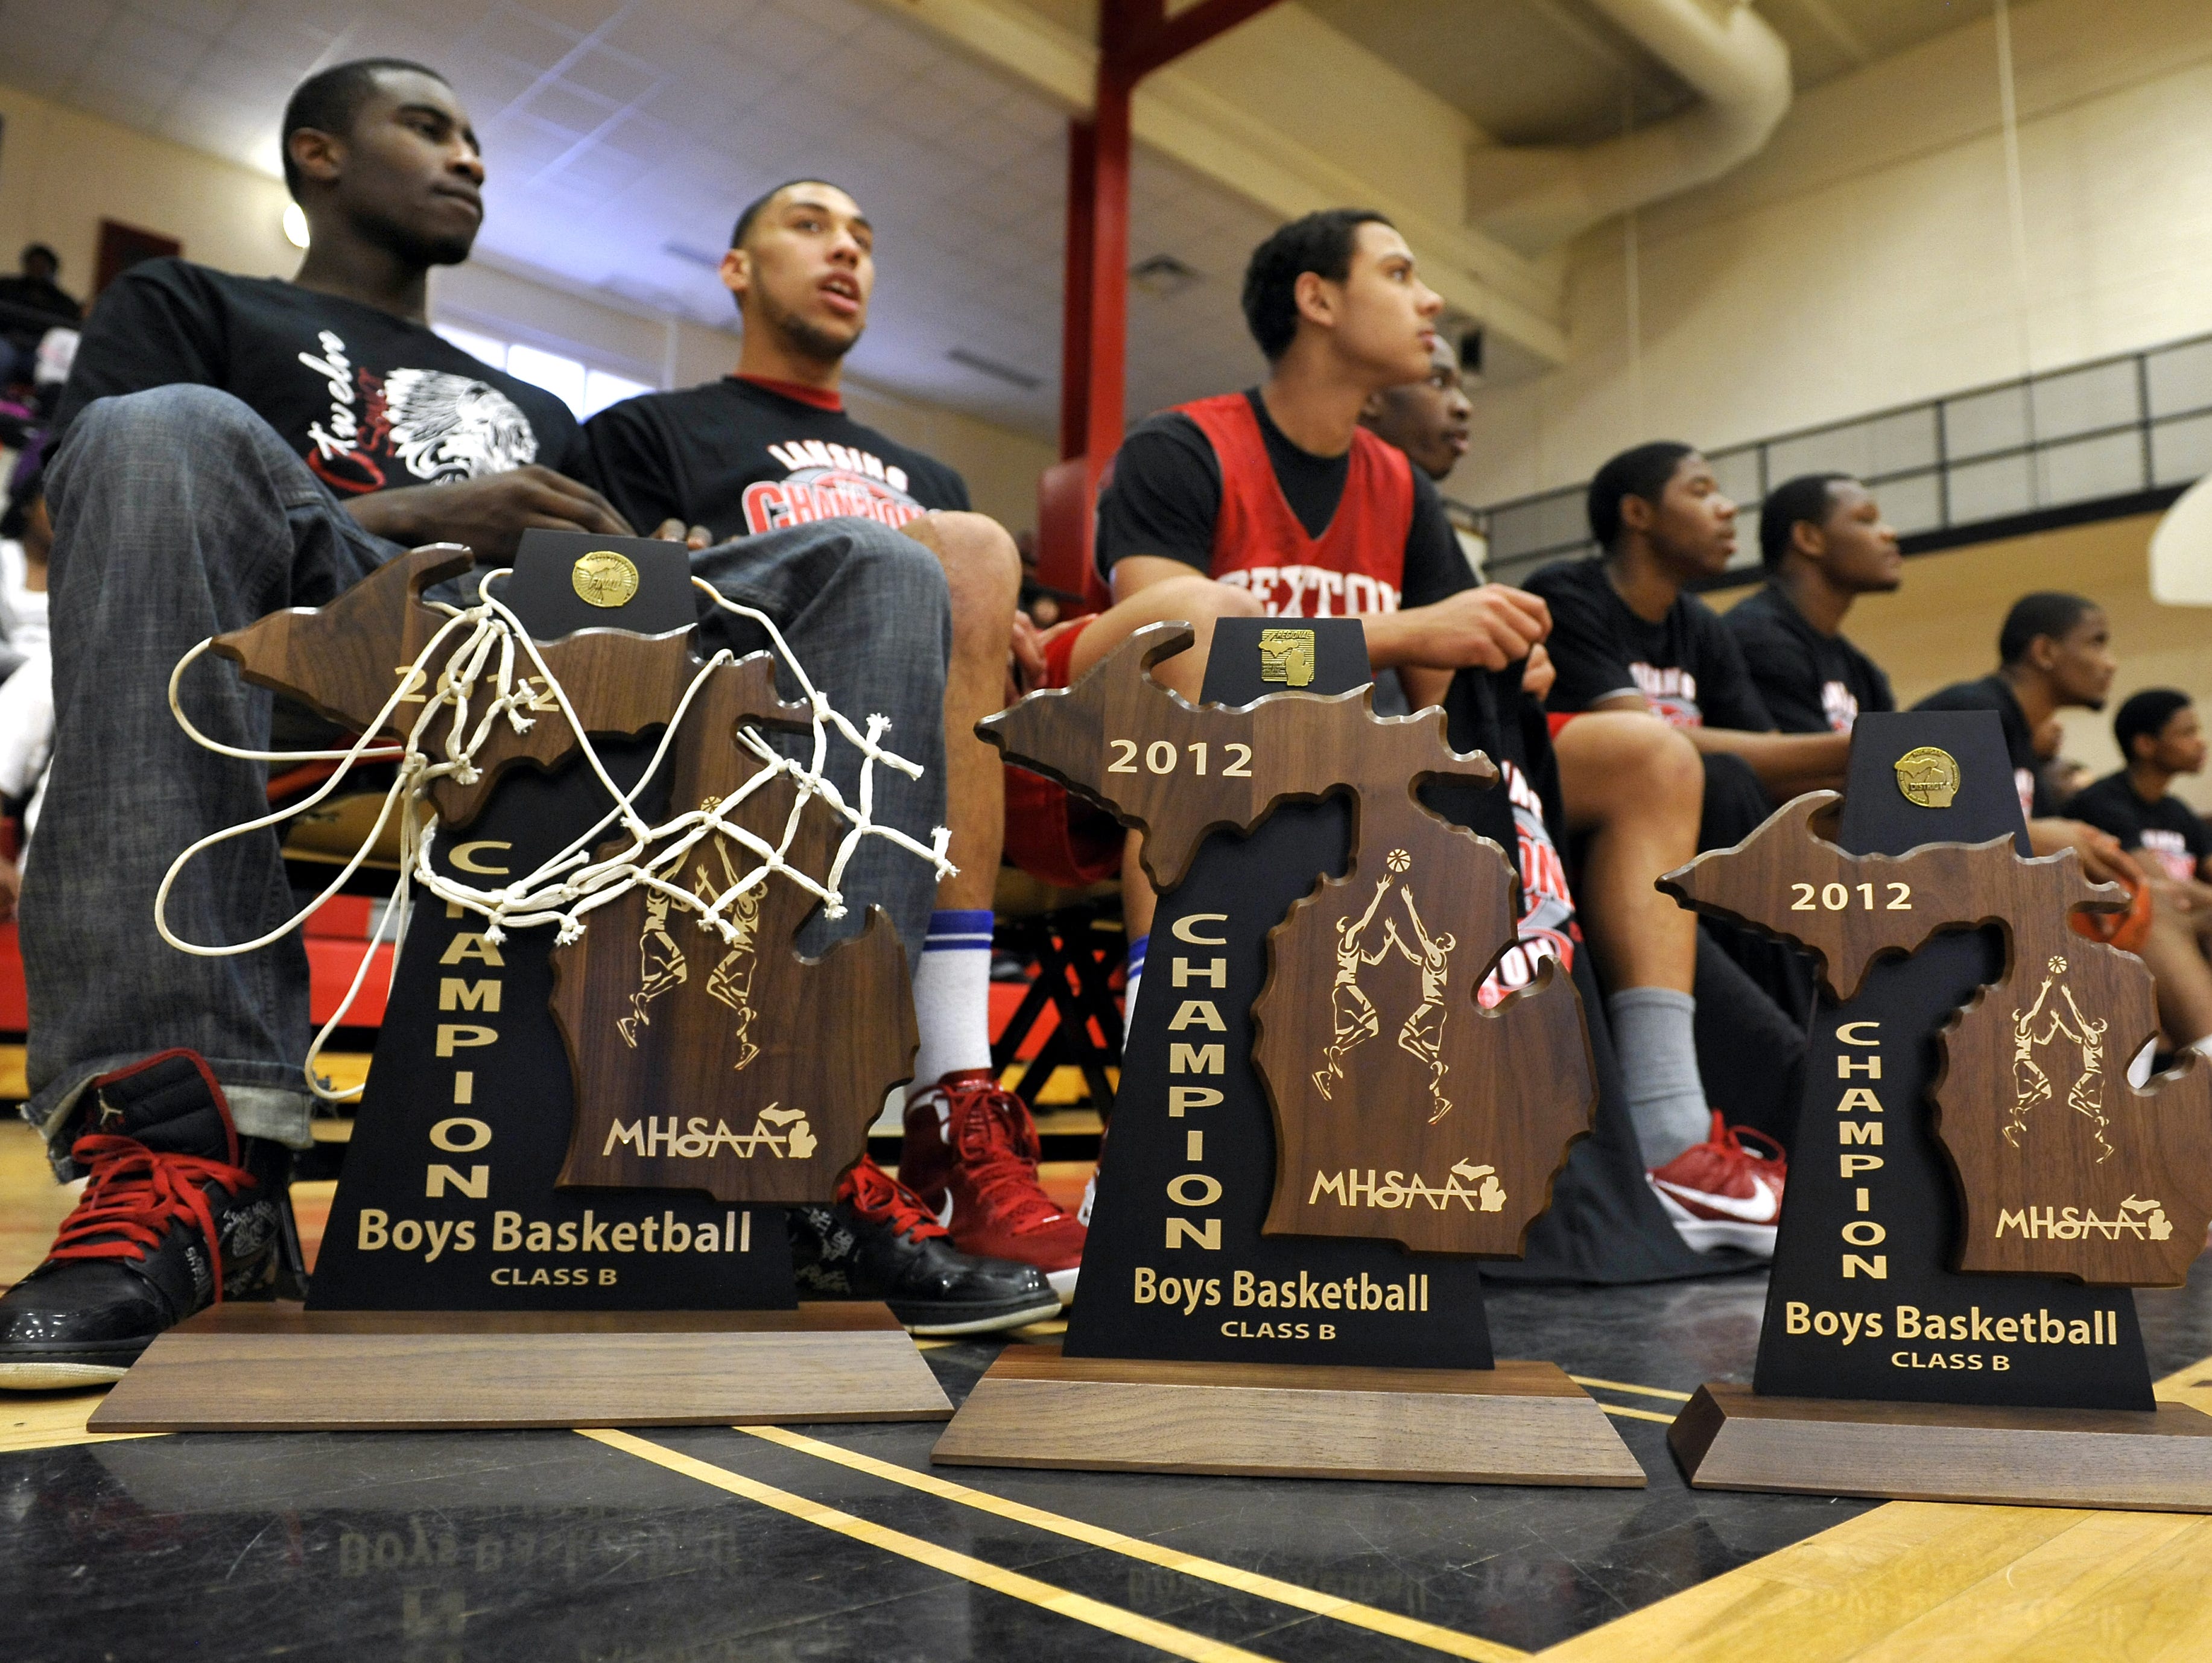 Sexton won back-to-back state championships in 2011 and 2012, led by Iowa's Anthony Clemmons (left), and MSU's Denzel Valentine (center) and Bryn Forbes (right). Based on accomplishments during their high school careers and after, it's arguably the greatest high school team ever from the Lansing area.